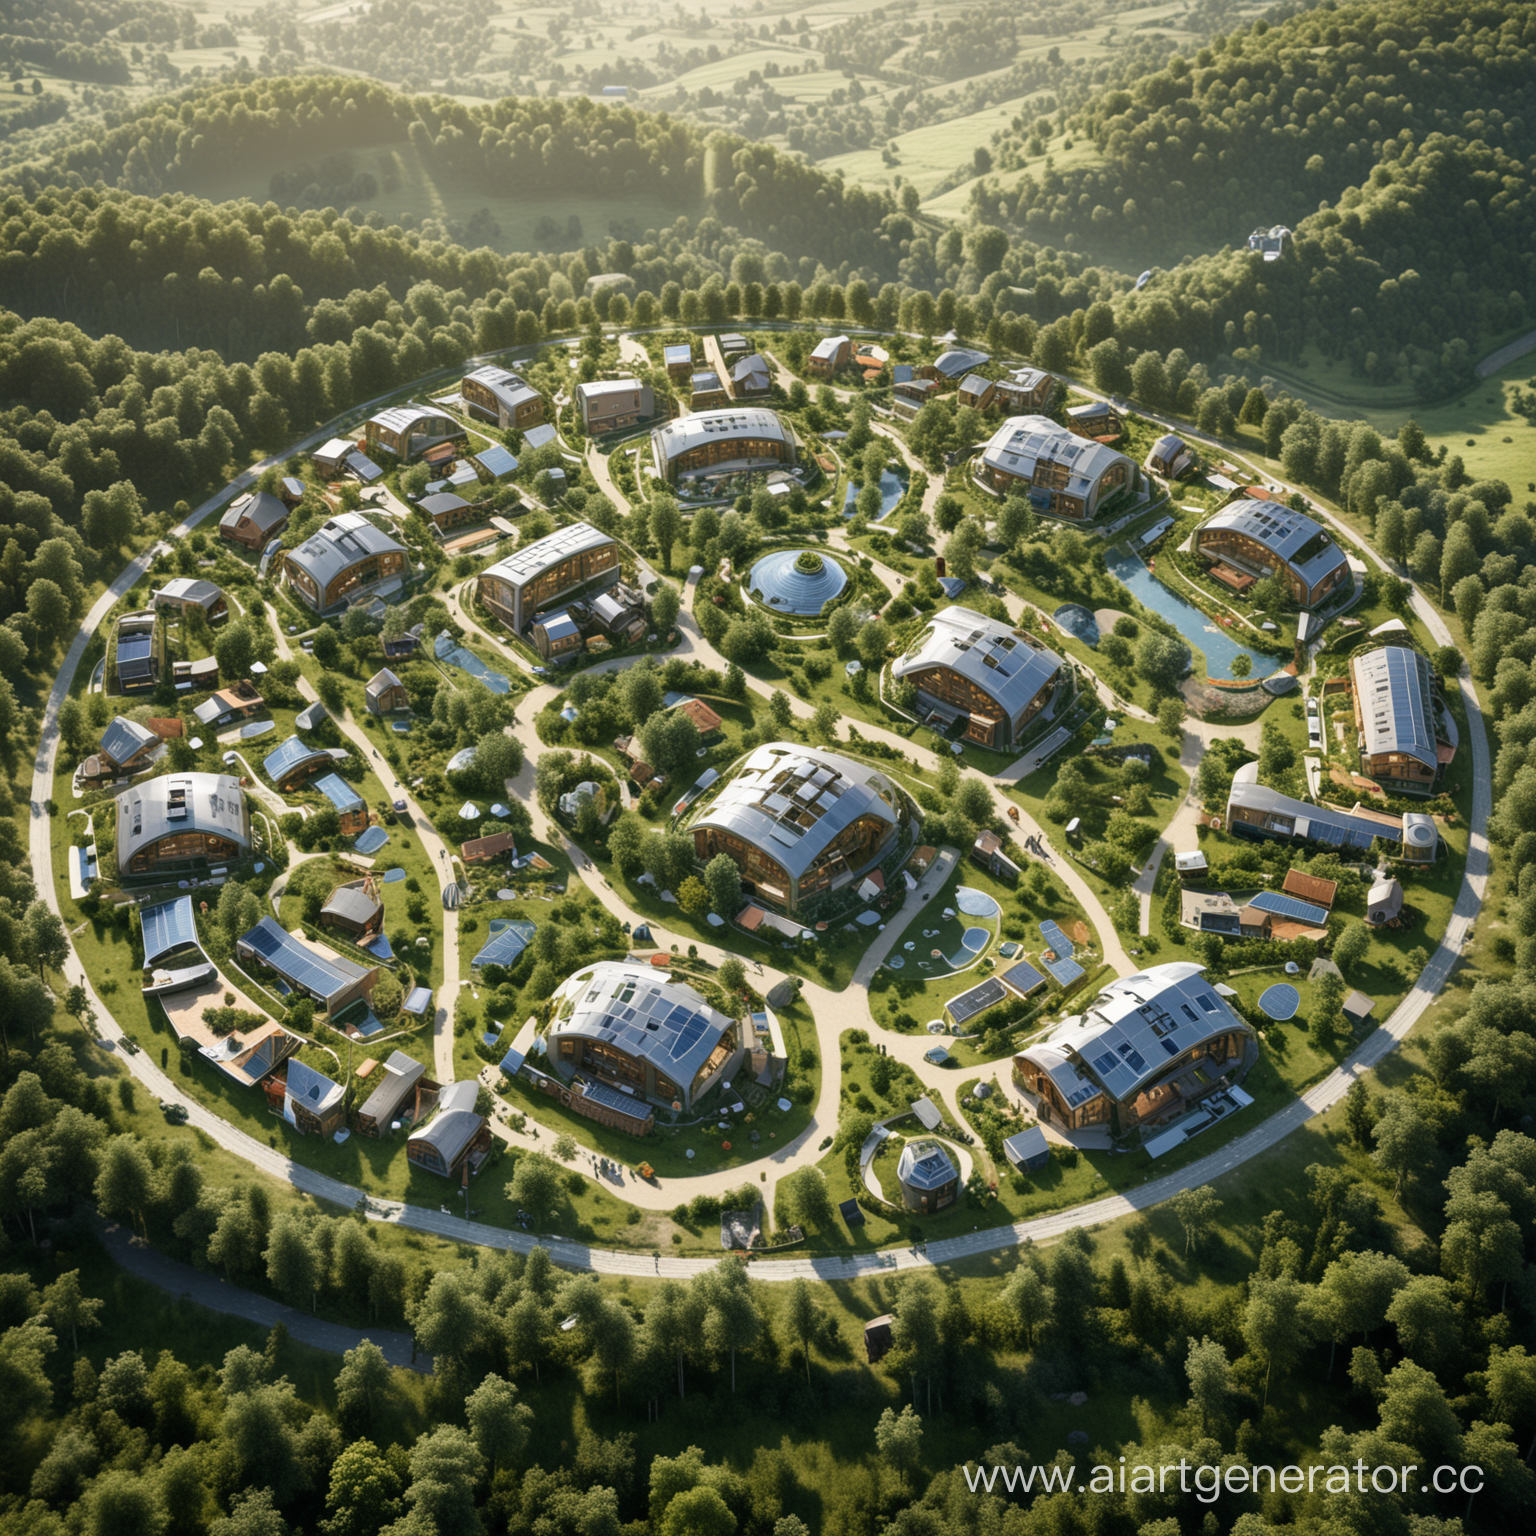 plan of eco-village, equipped with AI, situated among the green hills and trees, eco-friendly, 3D